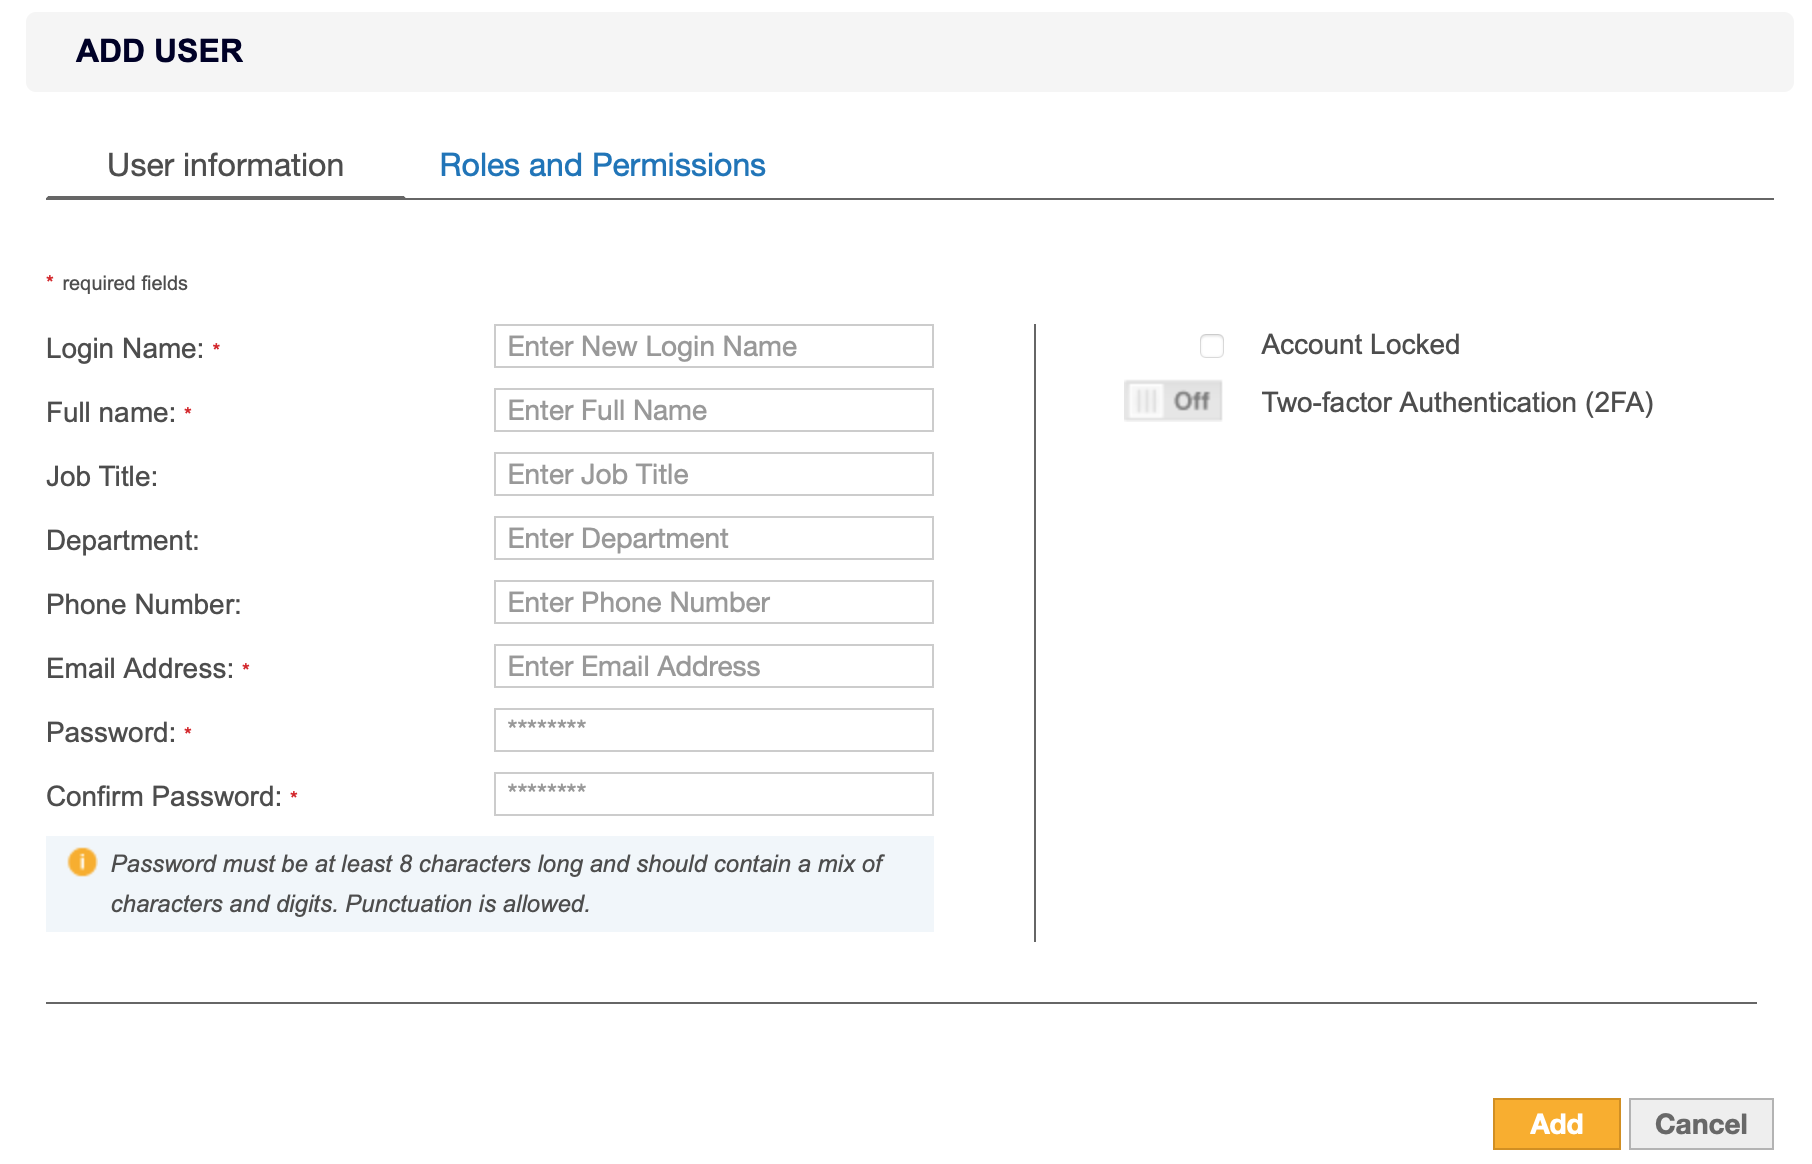 Configure the login name, full name, email address, password and other user information when adding a new user.